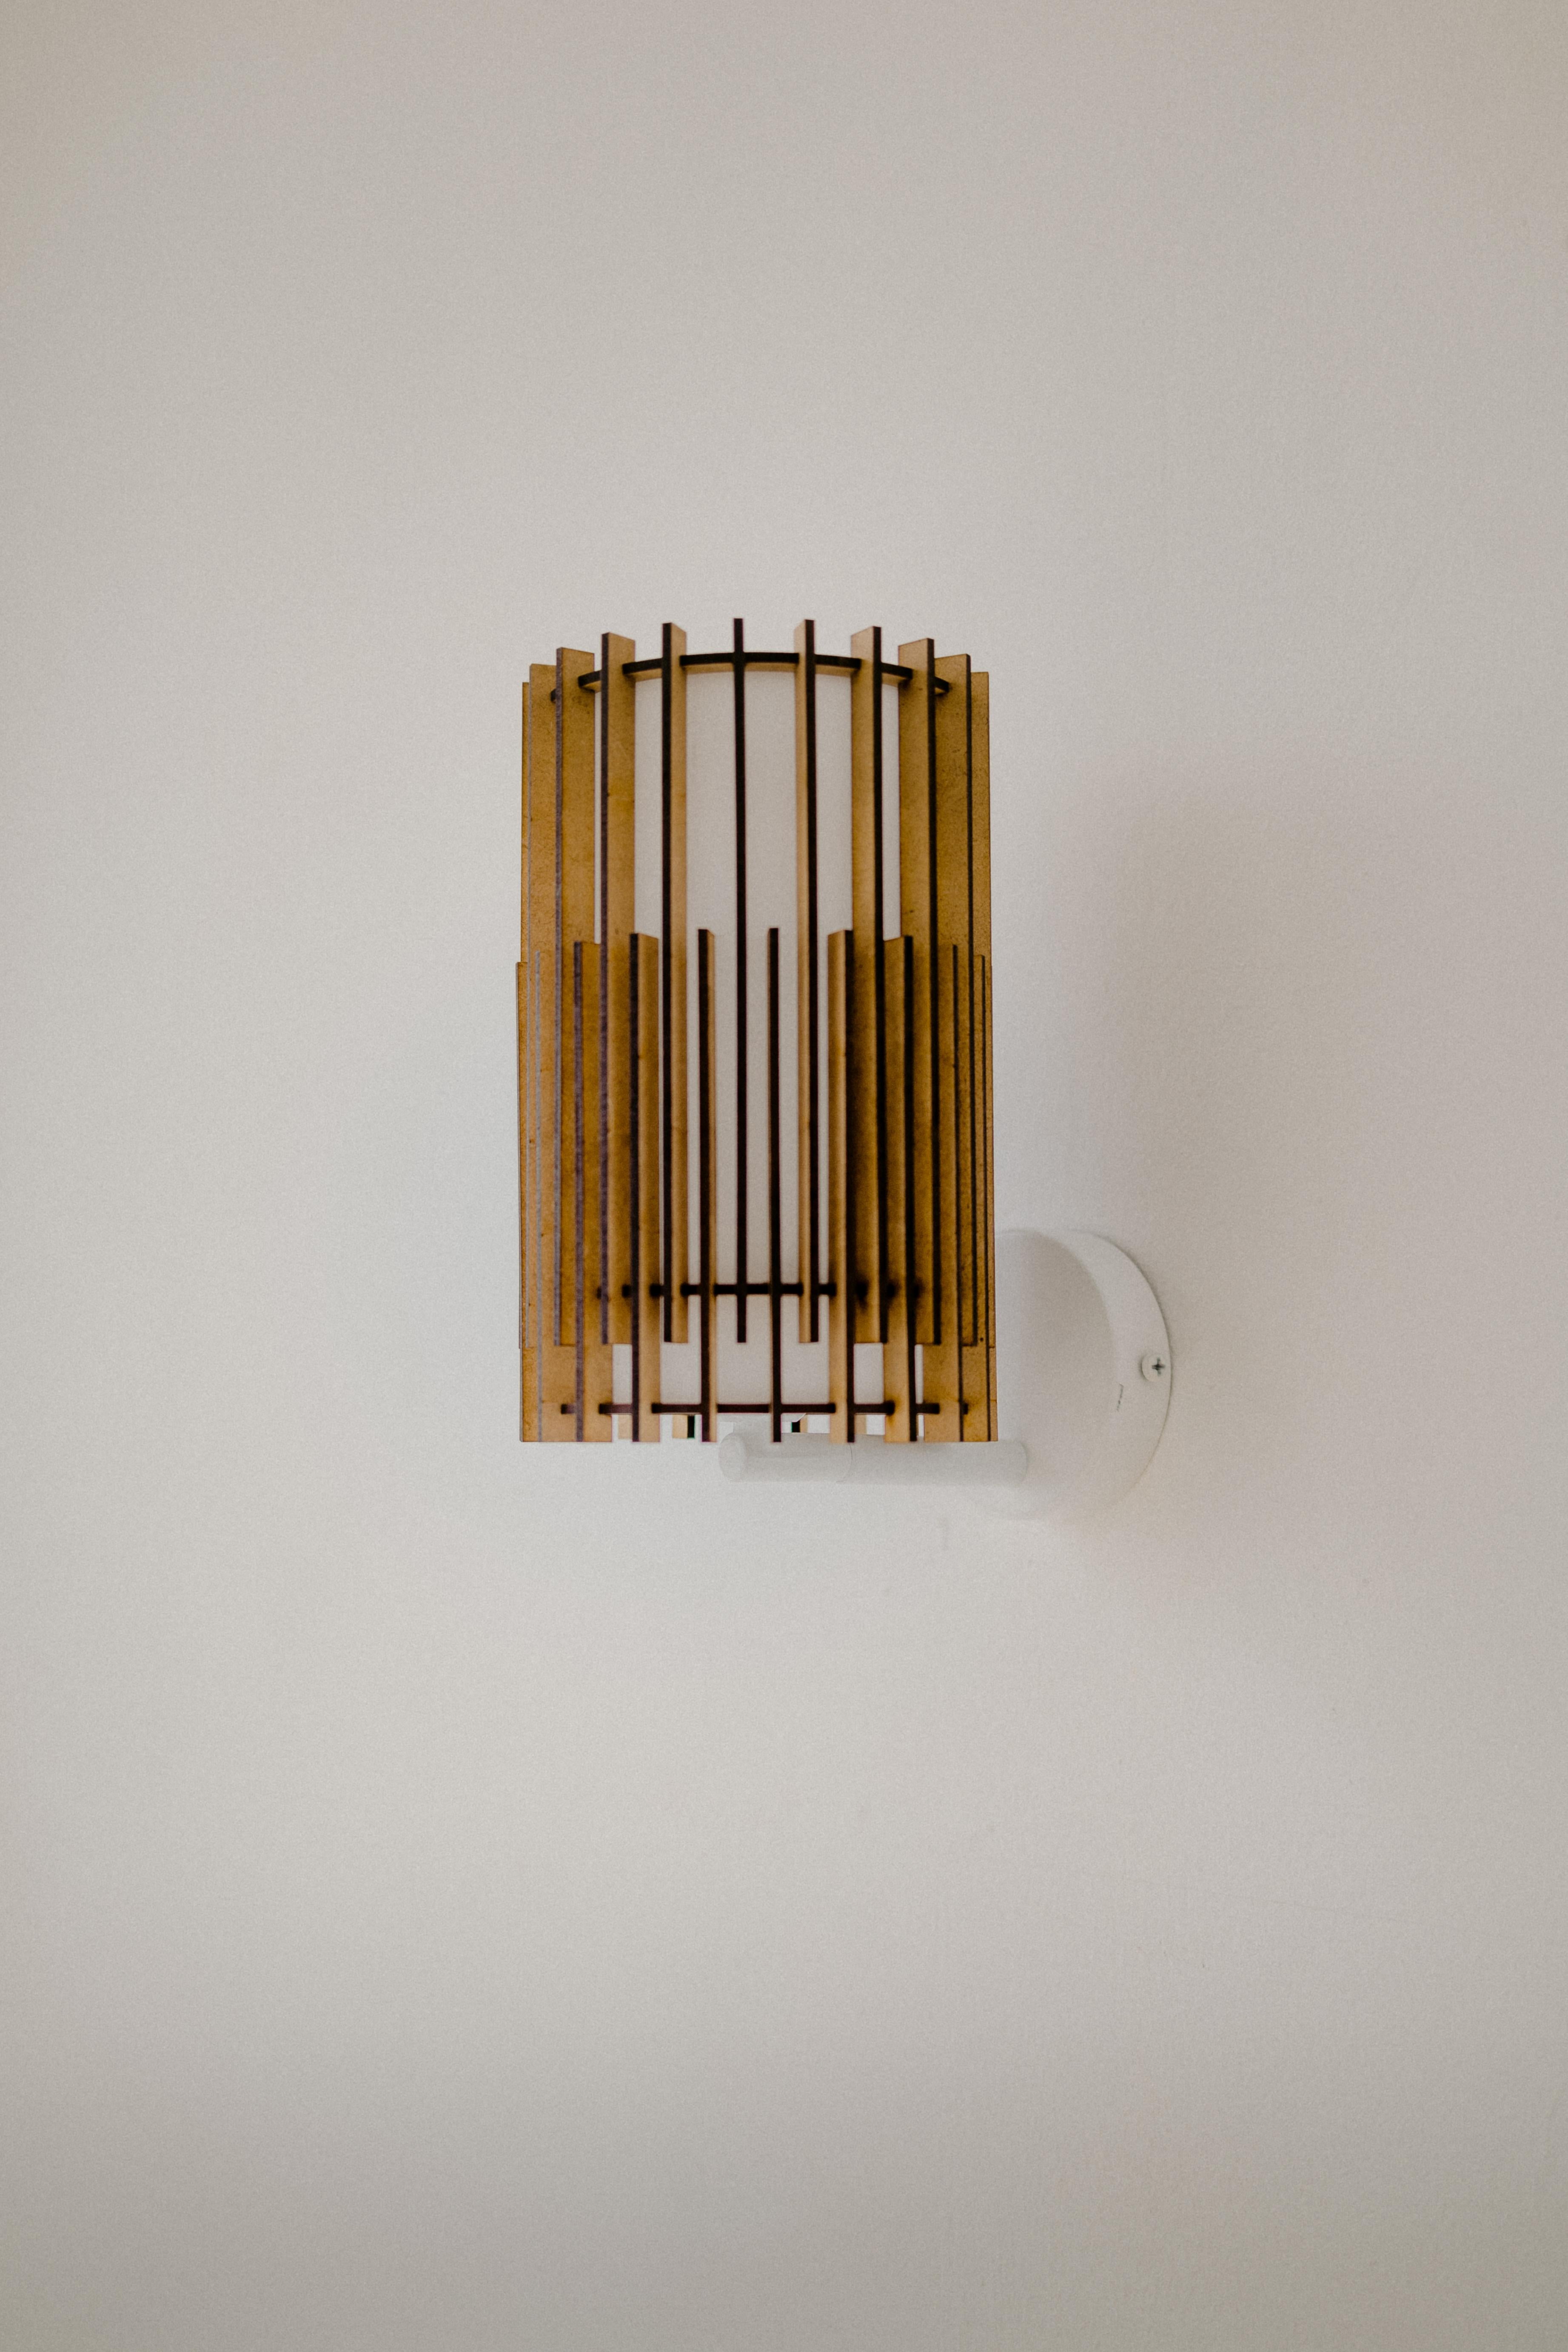 SUAU lamps are designed and manufactured by Mediterranean Objects in Barcelona, Spain. 

They have an outer lampshade made of MDF wooden slats, laser cut and assembled one by one, creating two different visual textures, one more dense and the other